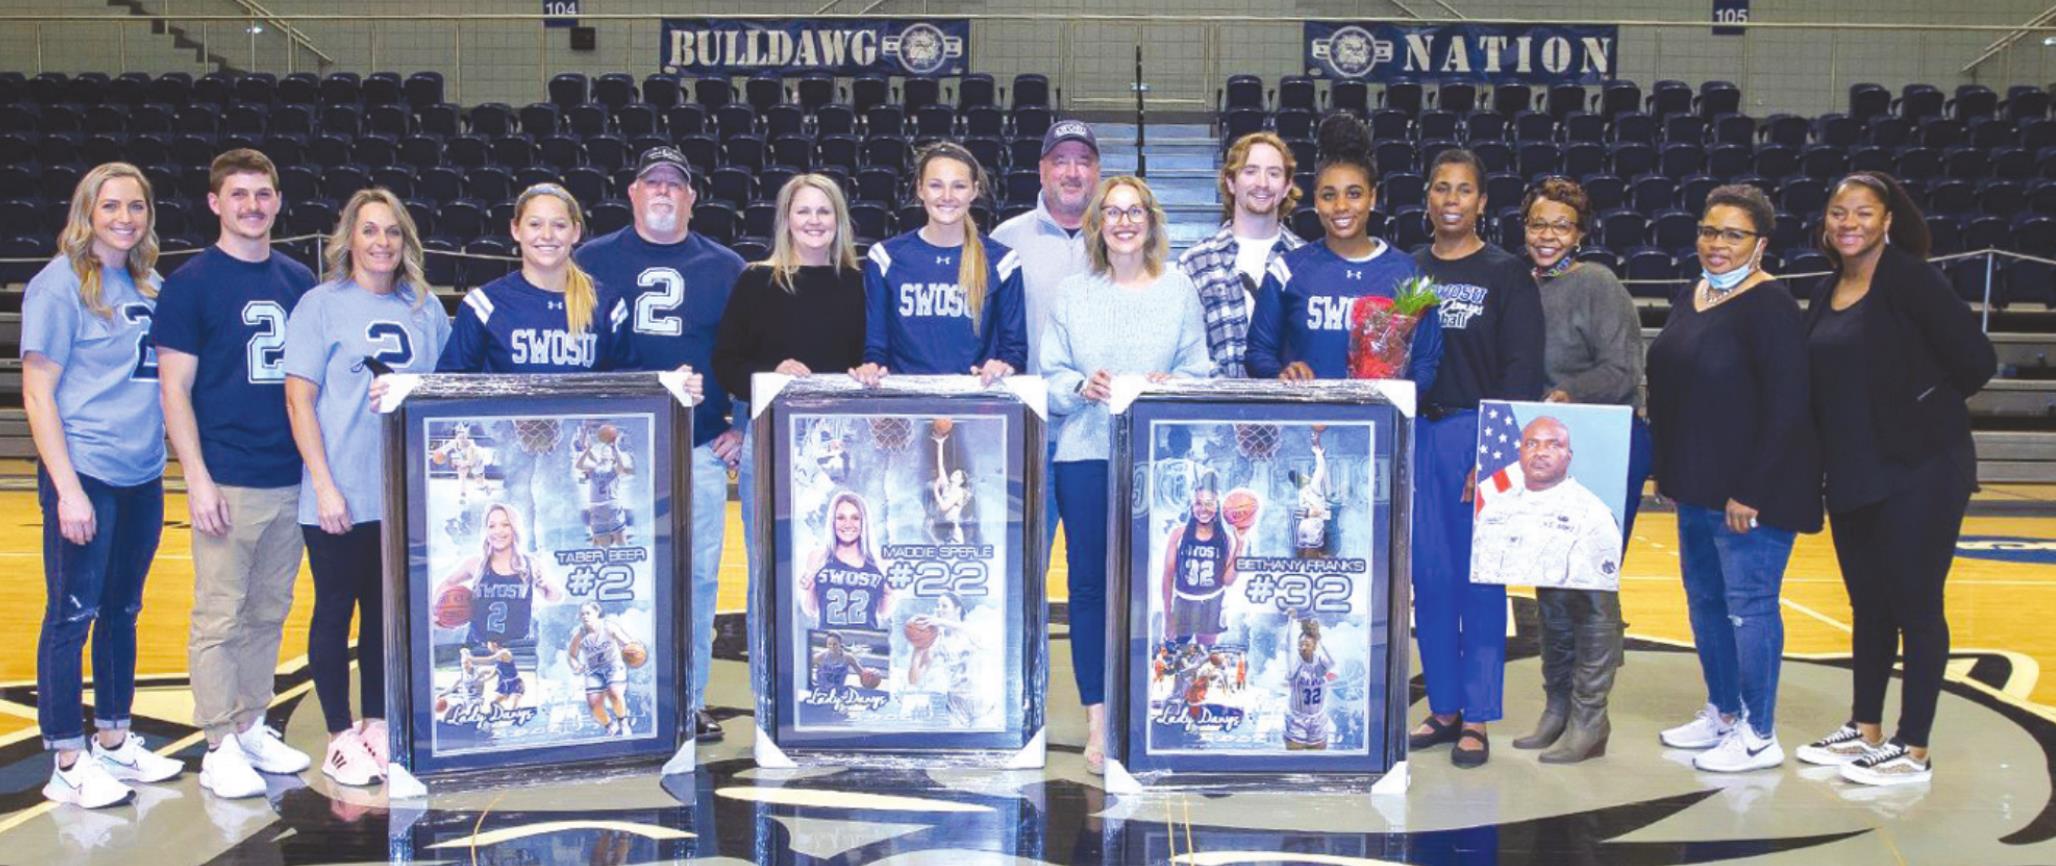 SWOSU celebrated the three seniors who are members of the women’s basketball team. Provided